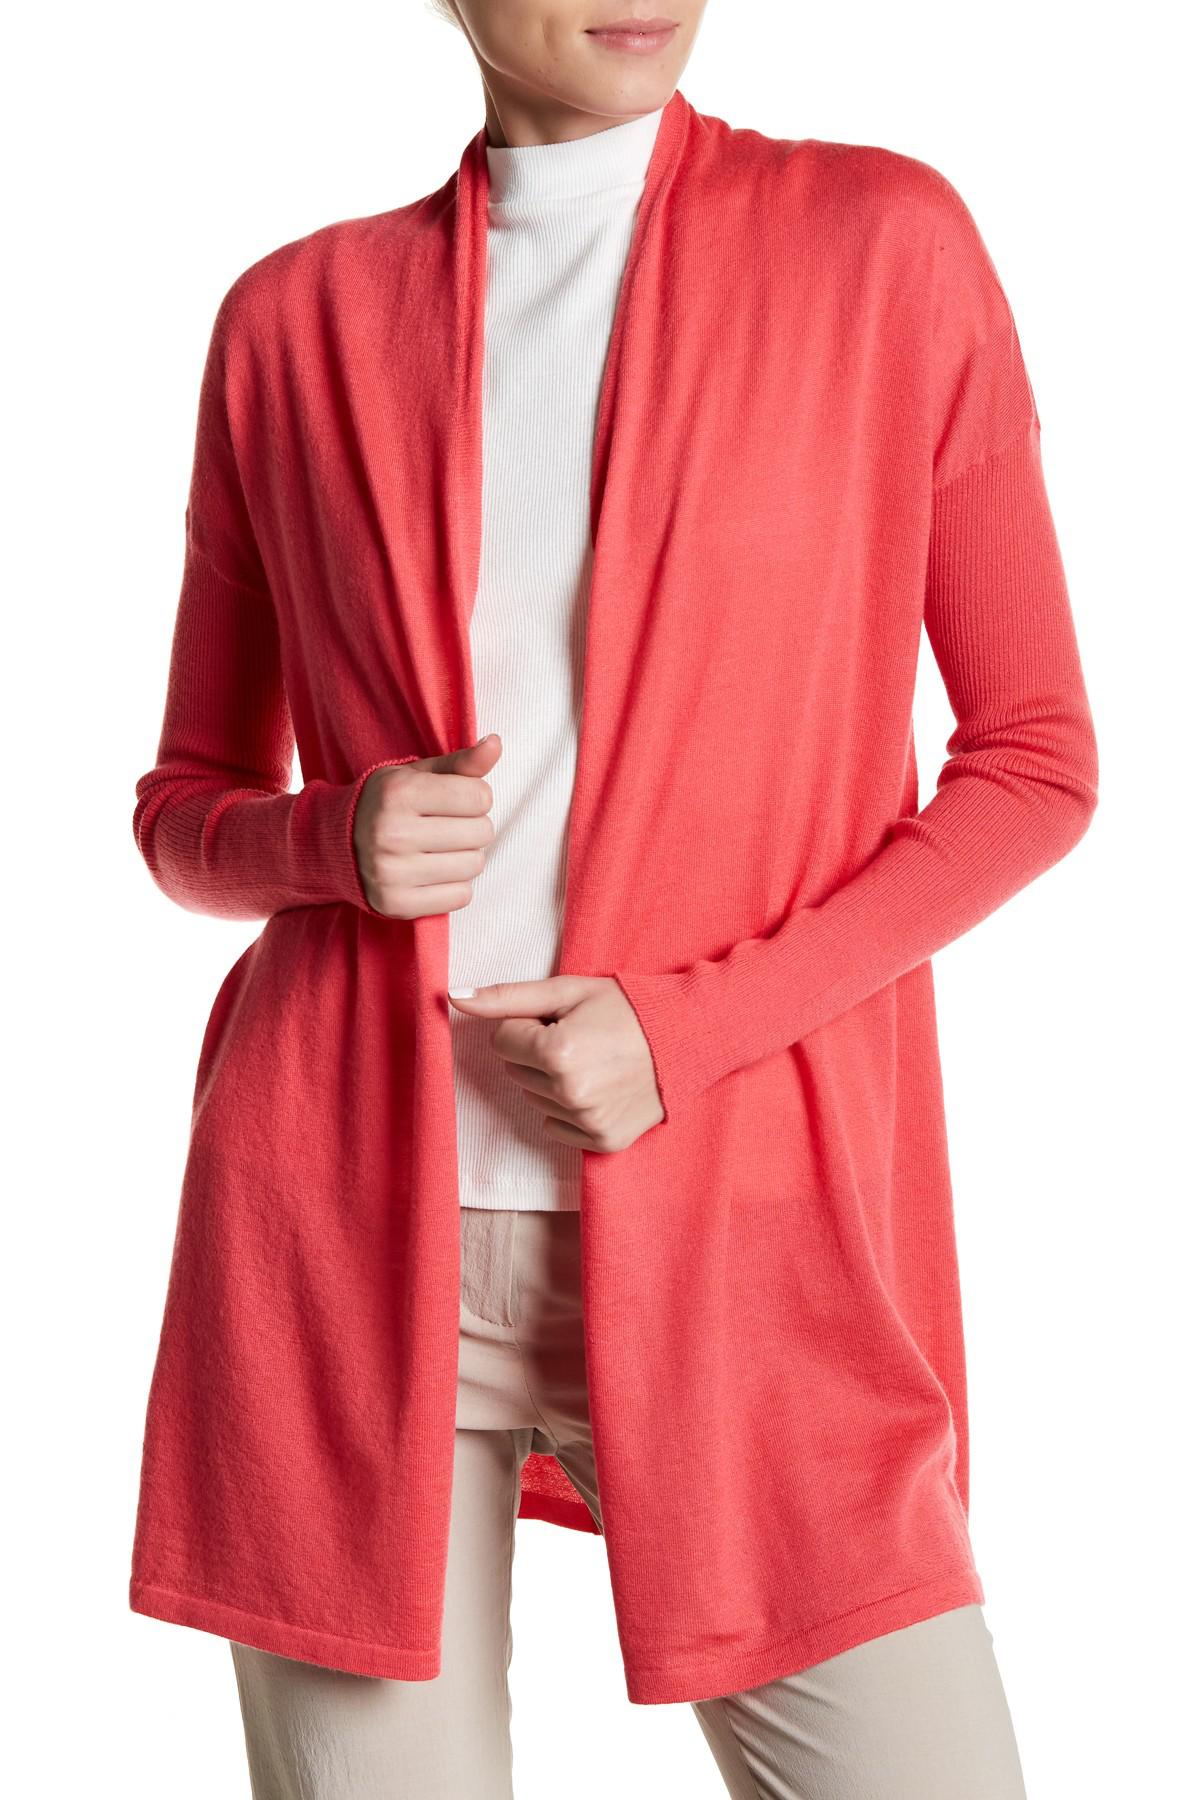 Lyst - Kinross Cashmere Cashmere Ribbed Sleeve Cardigan in Red